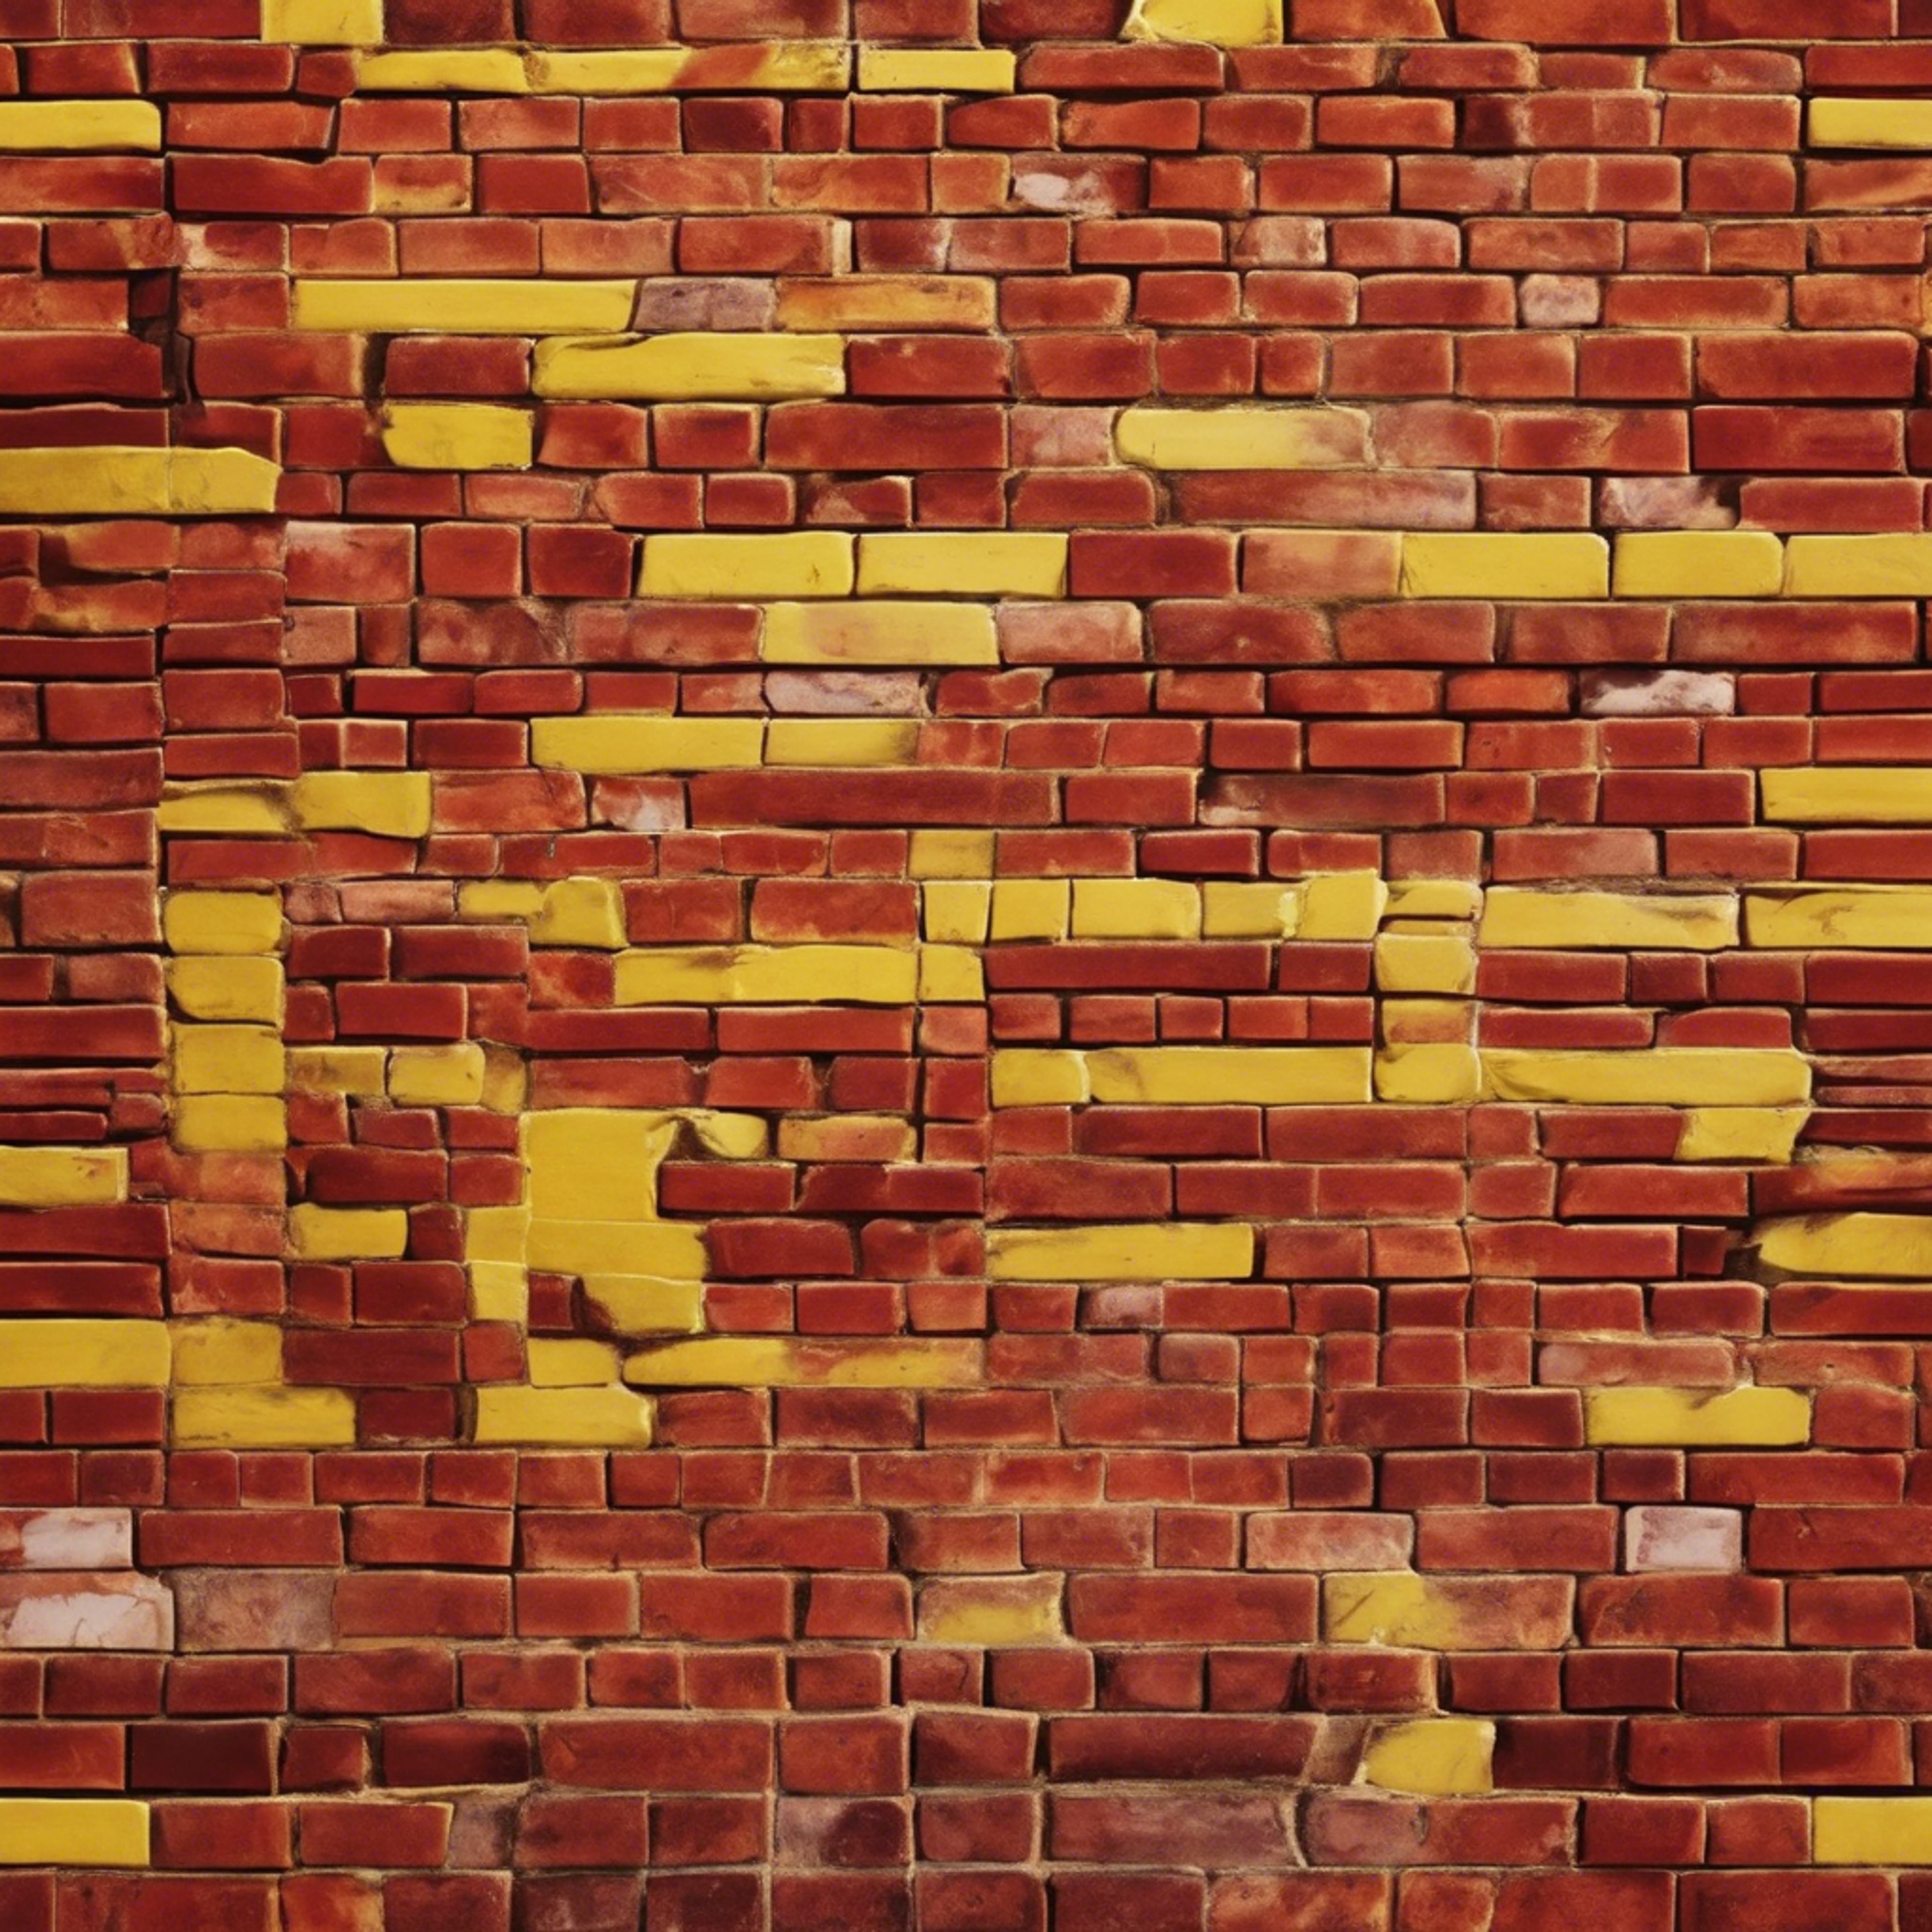 Red and yellow brick pattern seen through the illusion of a watery surface - the bricks appear slightly distorted yet colorful. Tapeta na zeď[6ac5a5324f9a41fcbc3c]